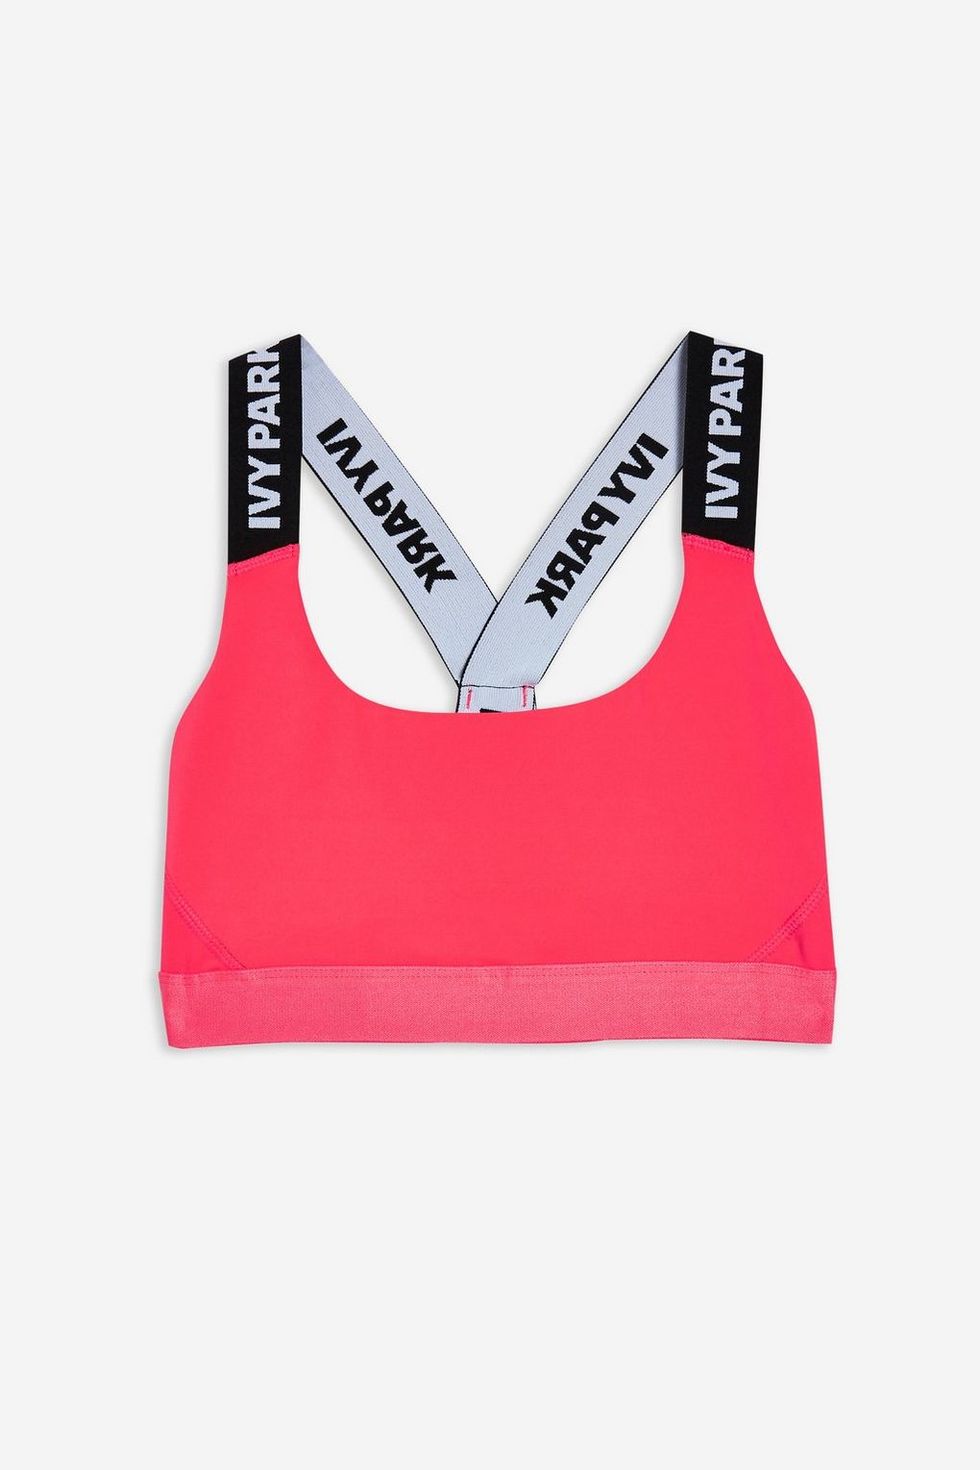 What Beyoncé's Ivy Park Activewear Line Really Looks Like